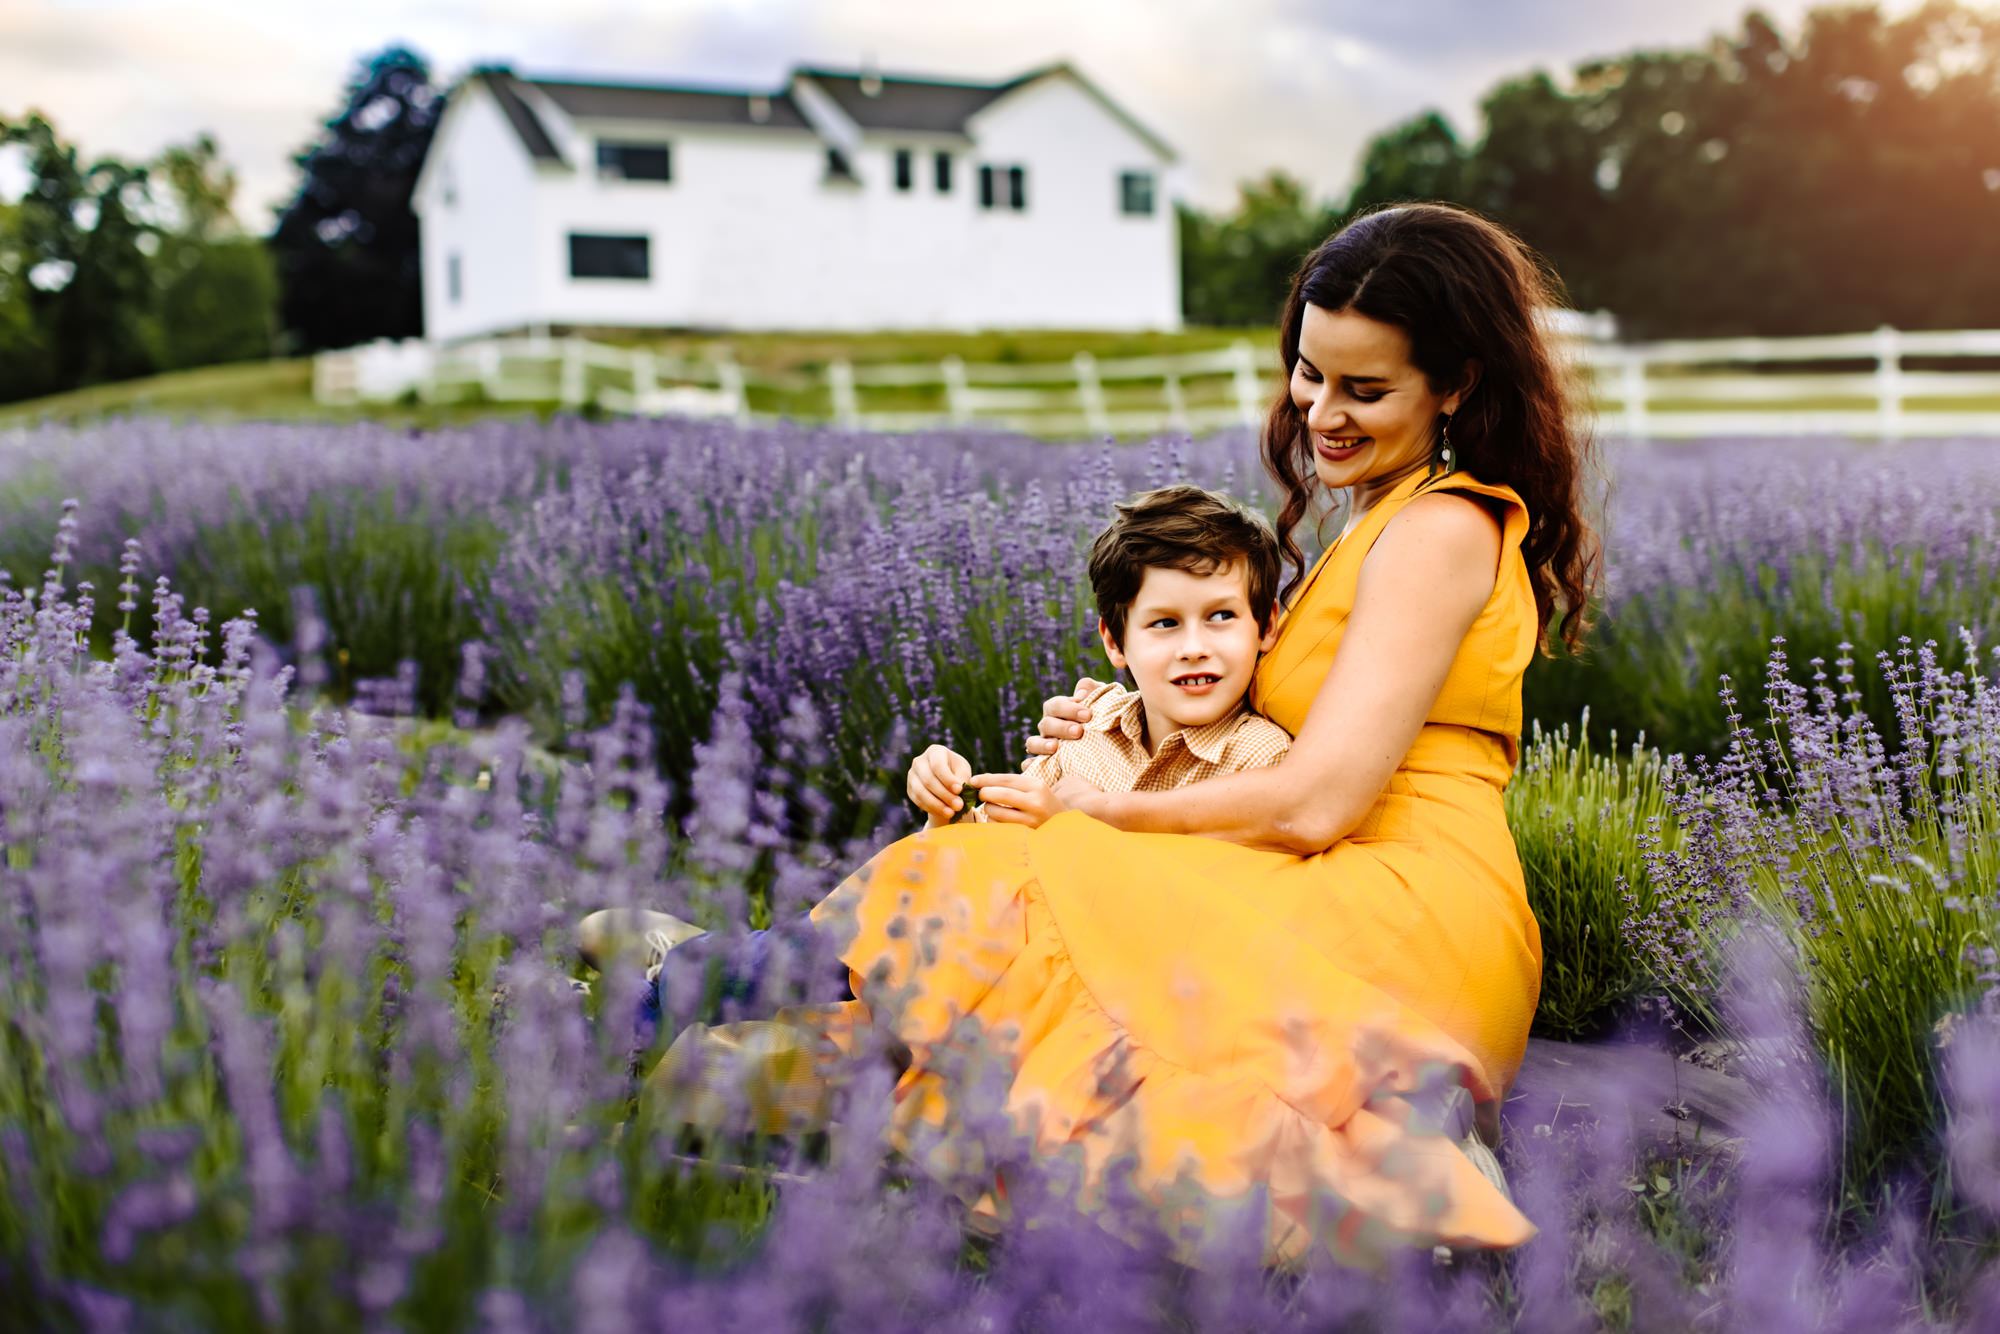 Lavender Farm - Spring Pictures - Boston Family Photographer - Mom and Son hugging